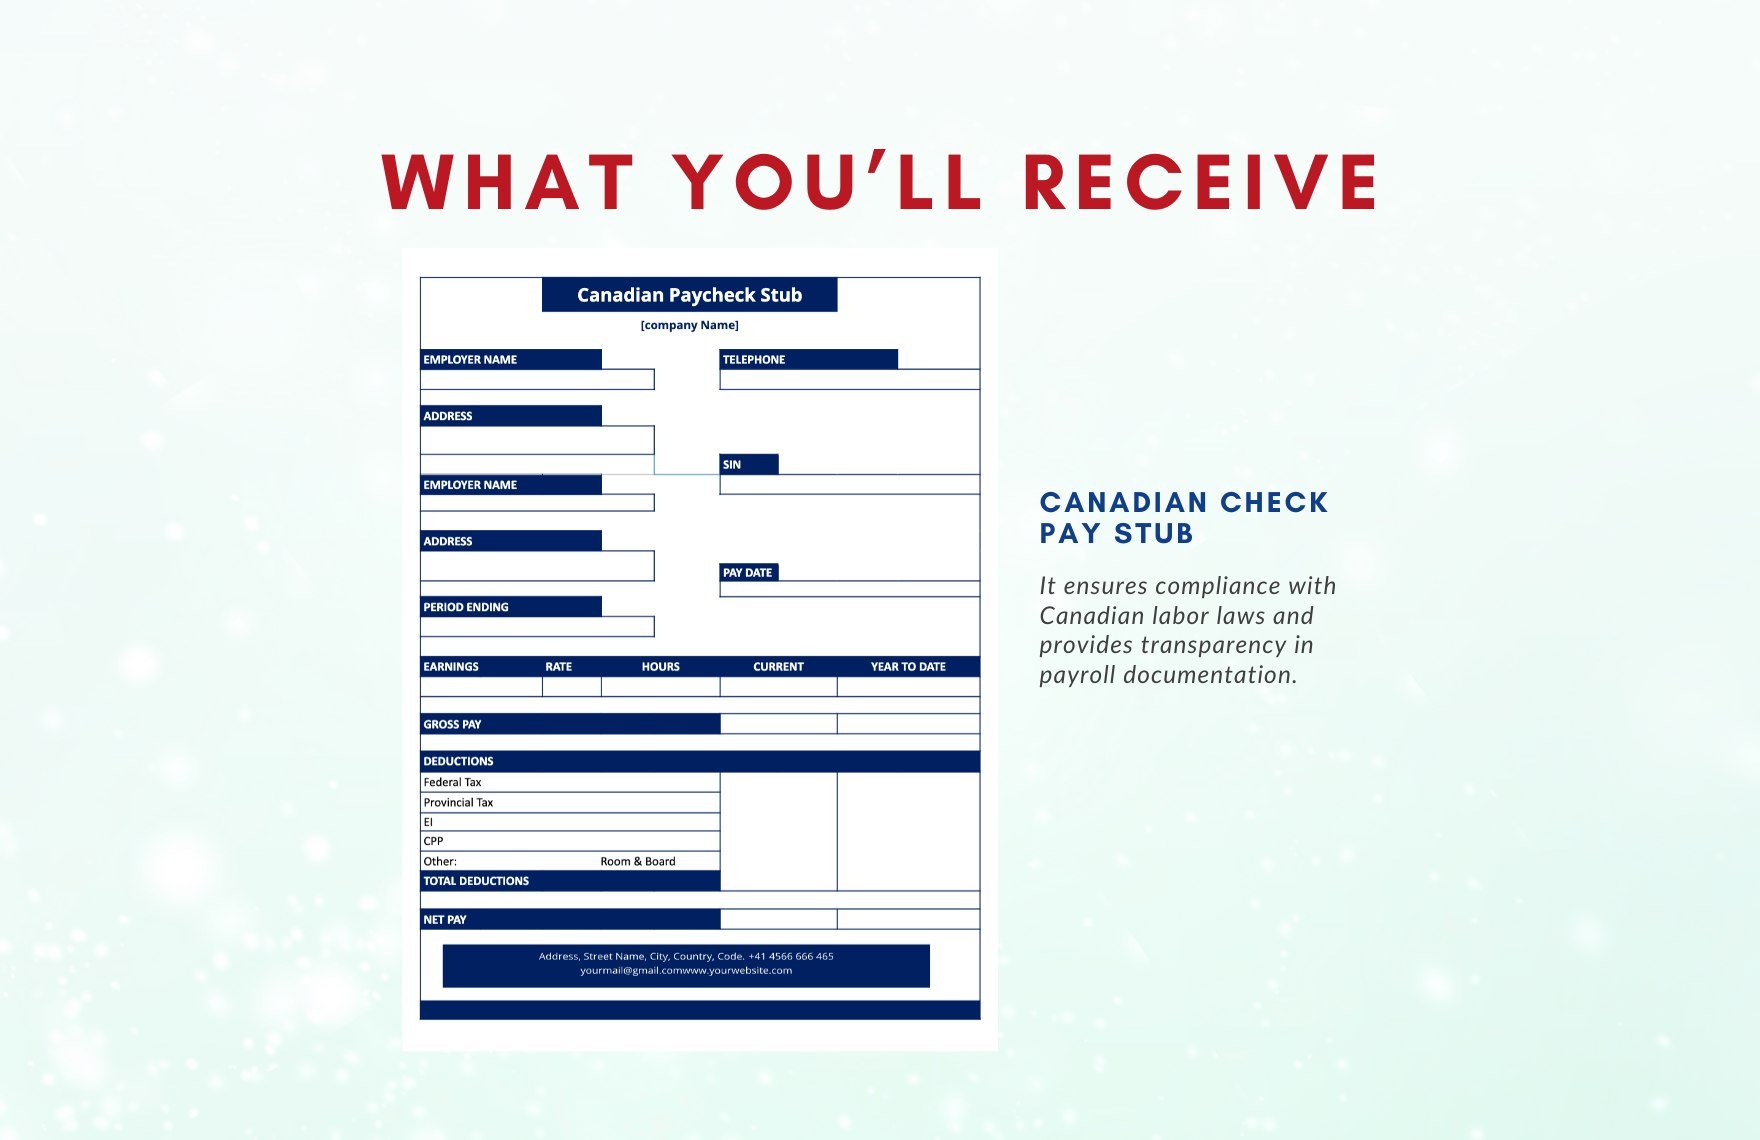 Canadian Check Pay Stub Template